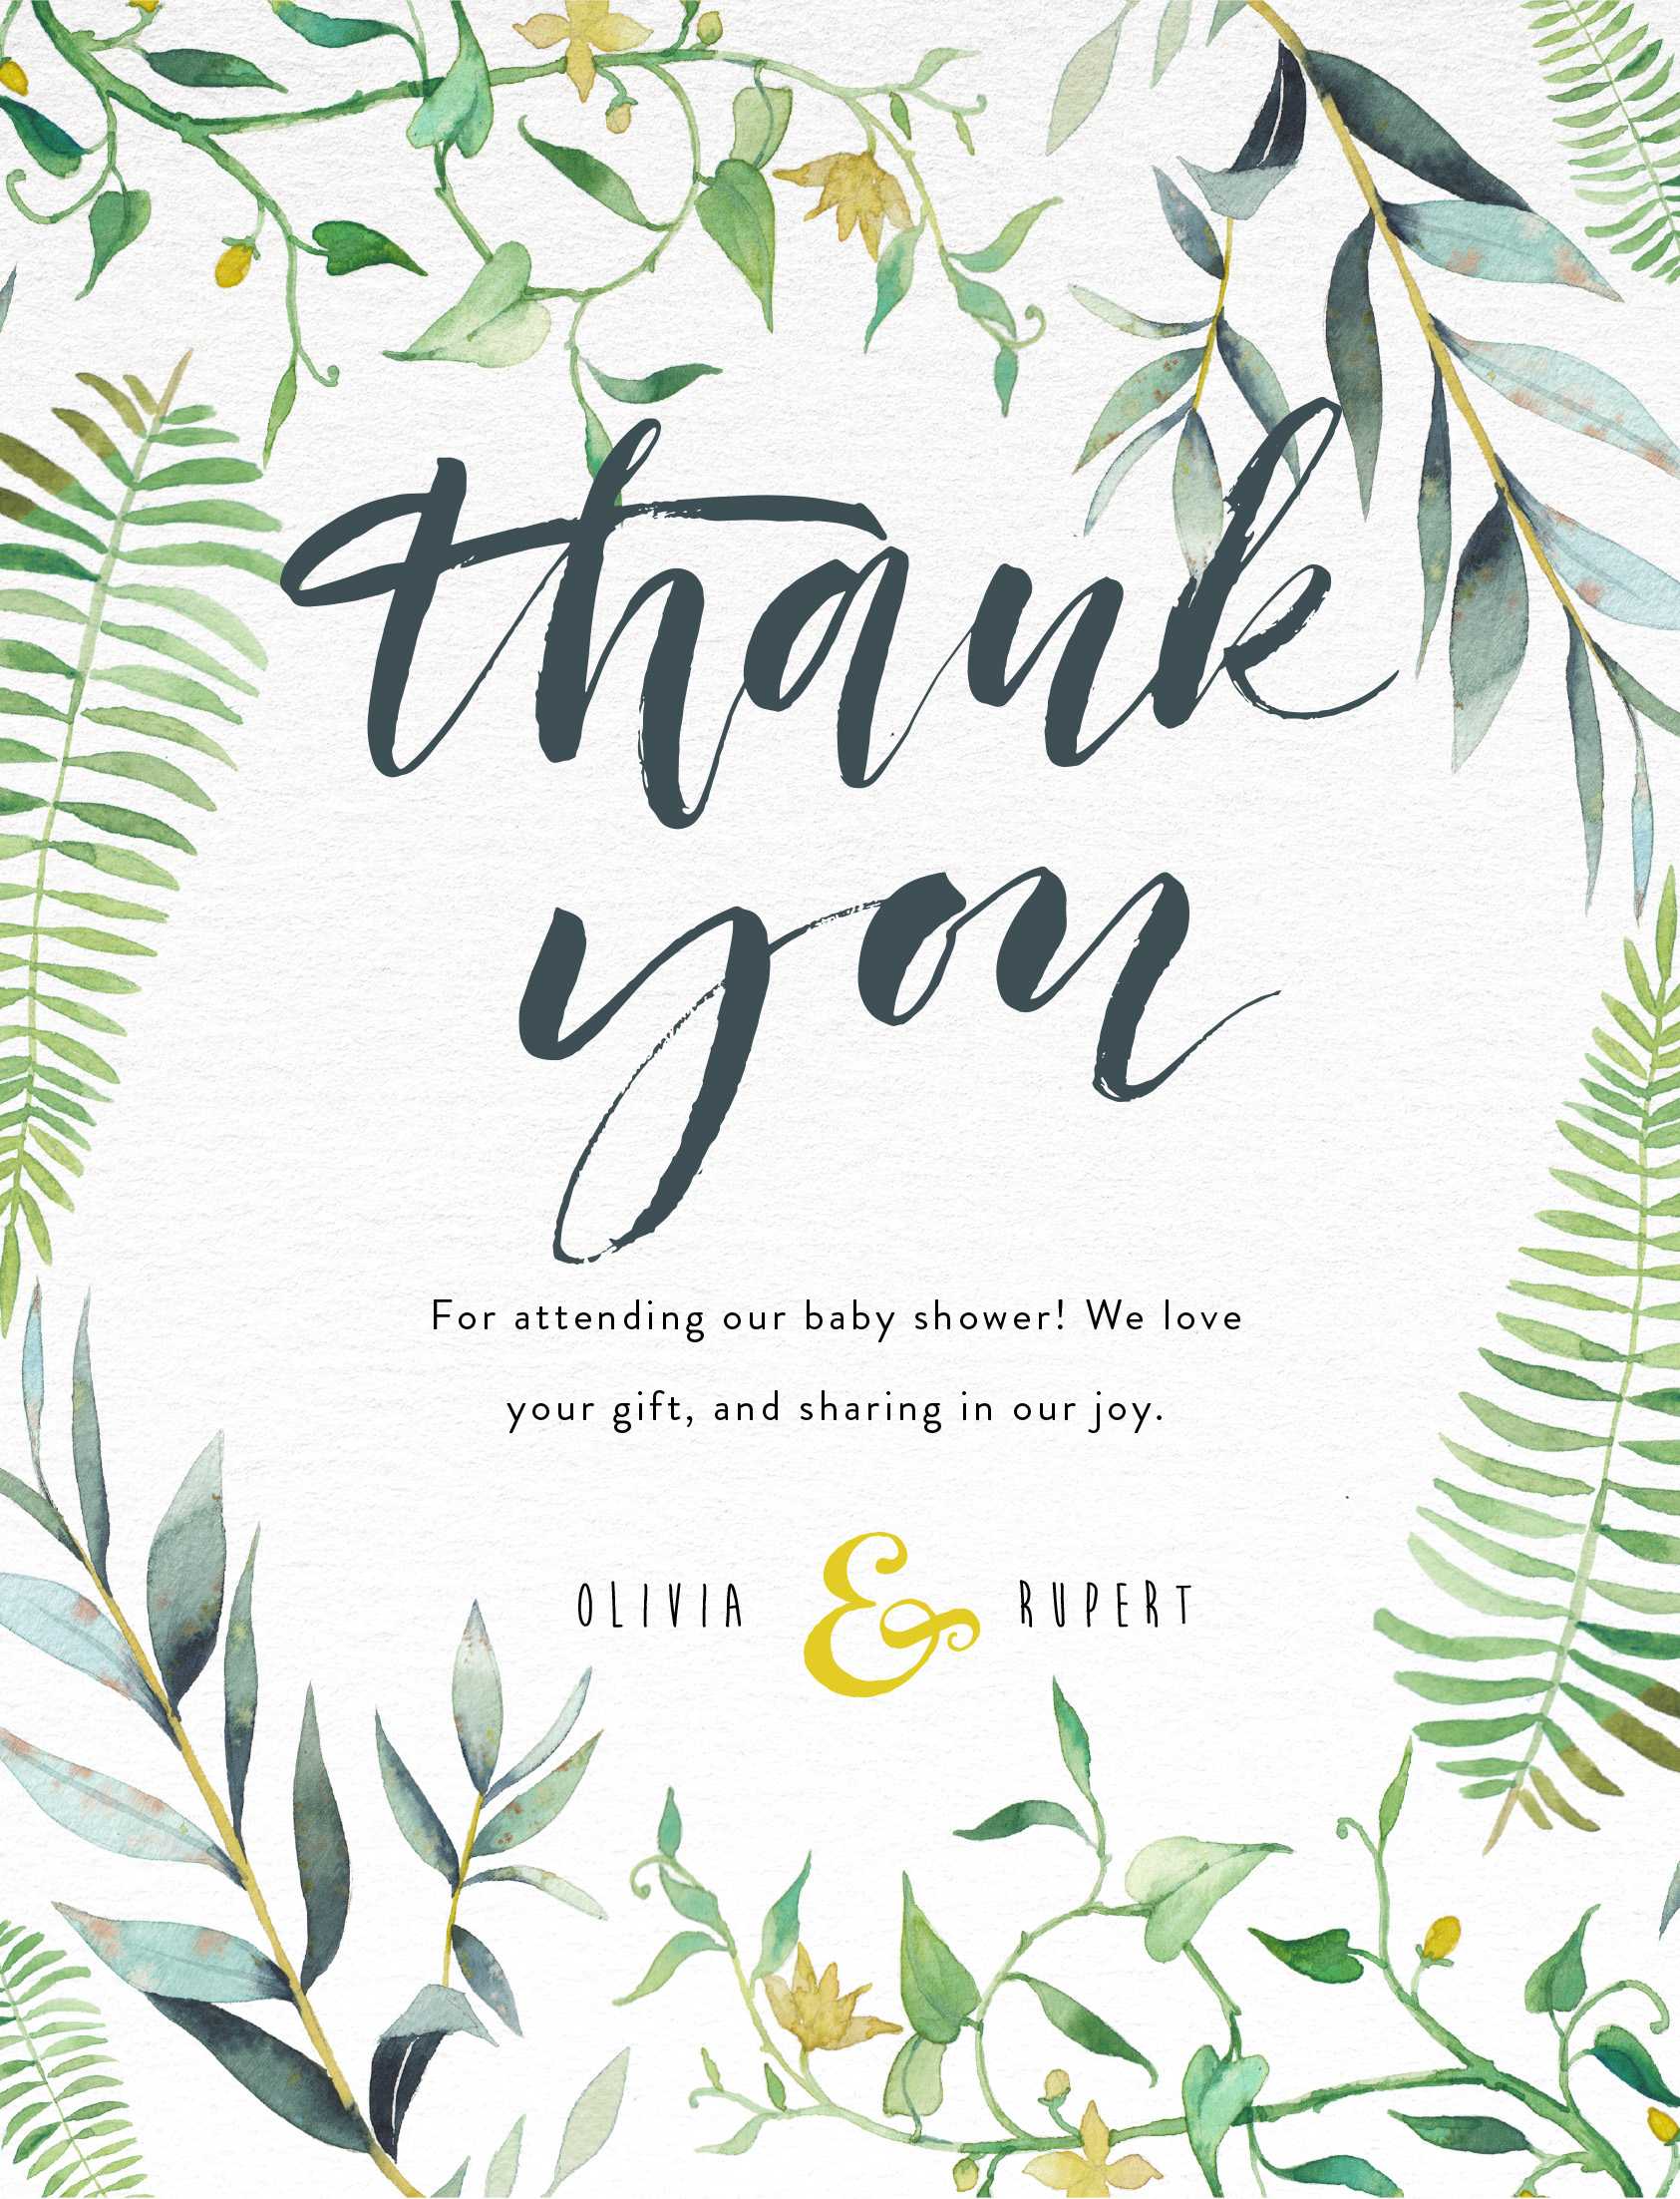 Baby Shower Thank You Cards | Paperlust Intended For Template For Baby Shower Thank You Cards